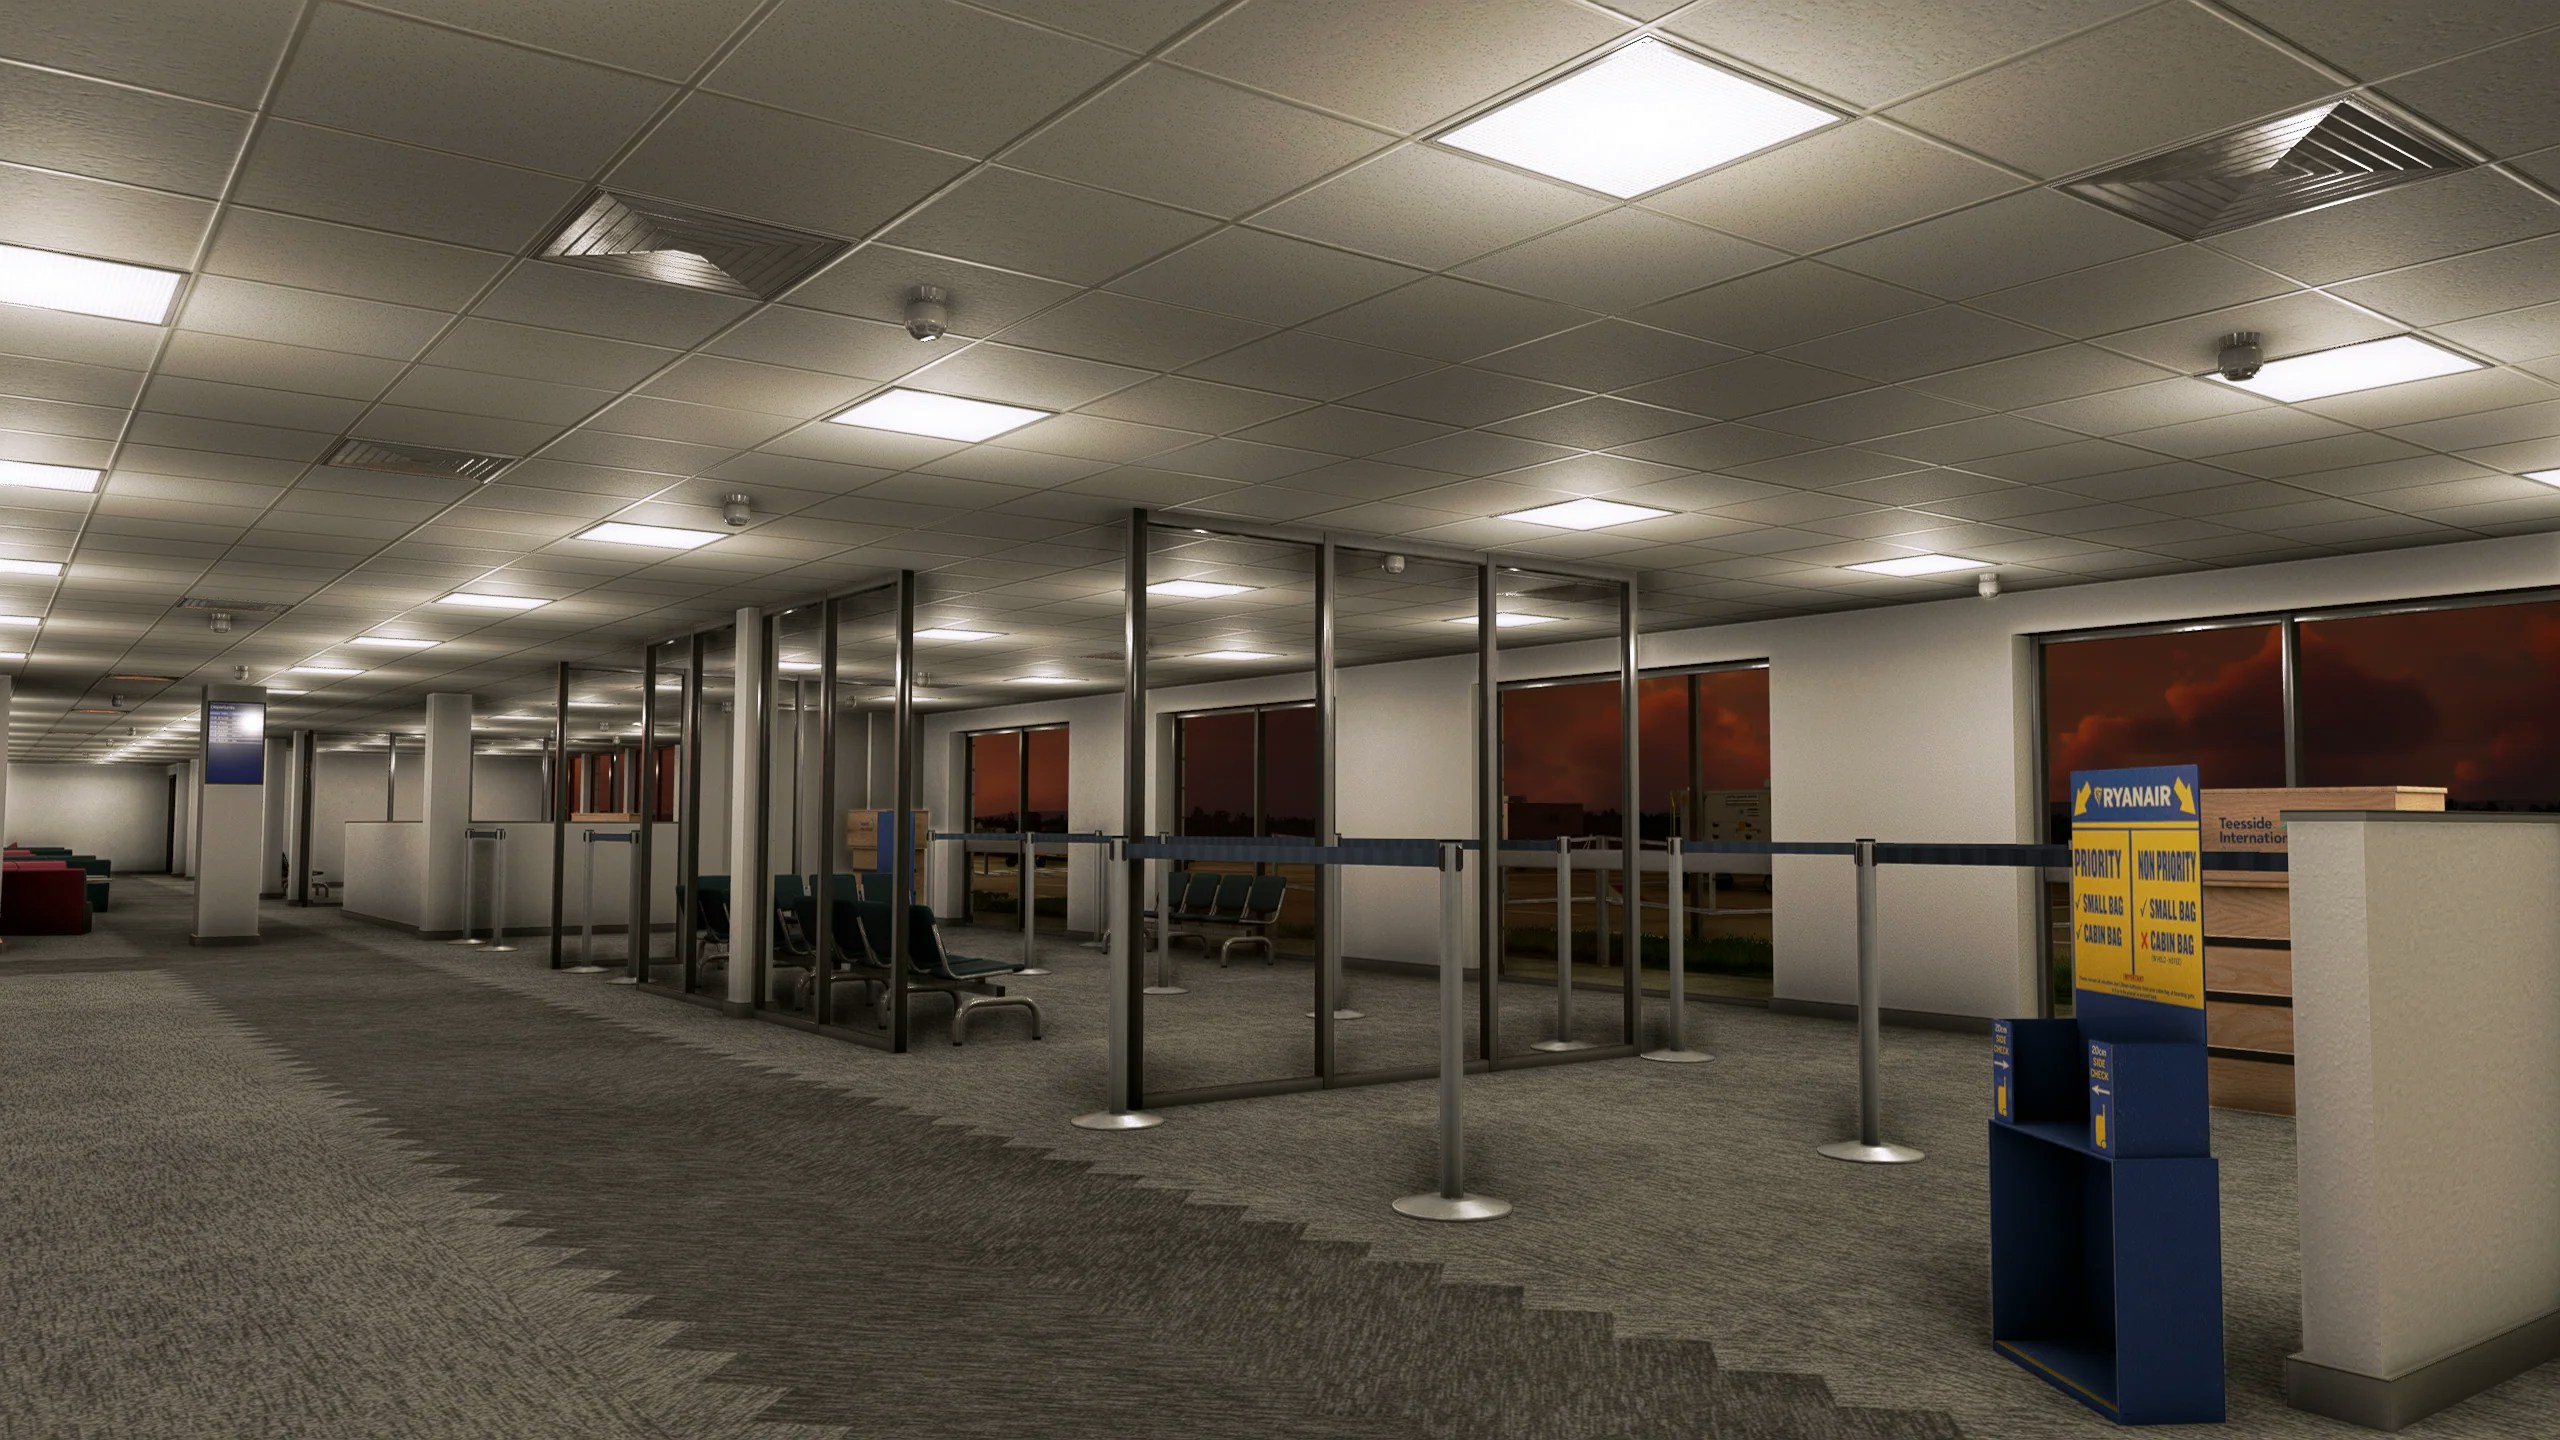 Fly X Simulations Release Teesside Airport for MSFS